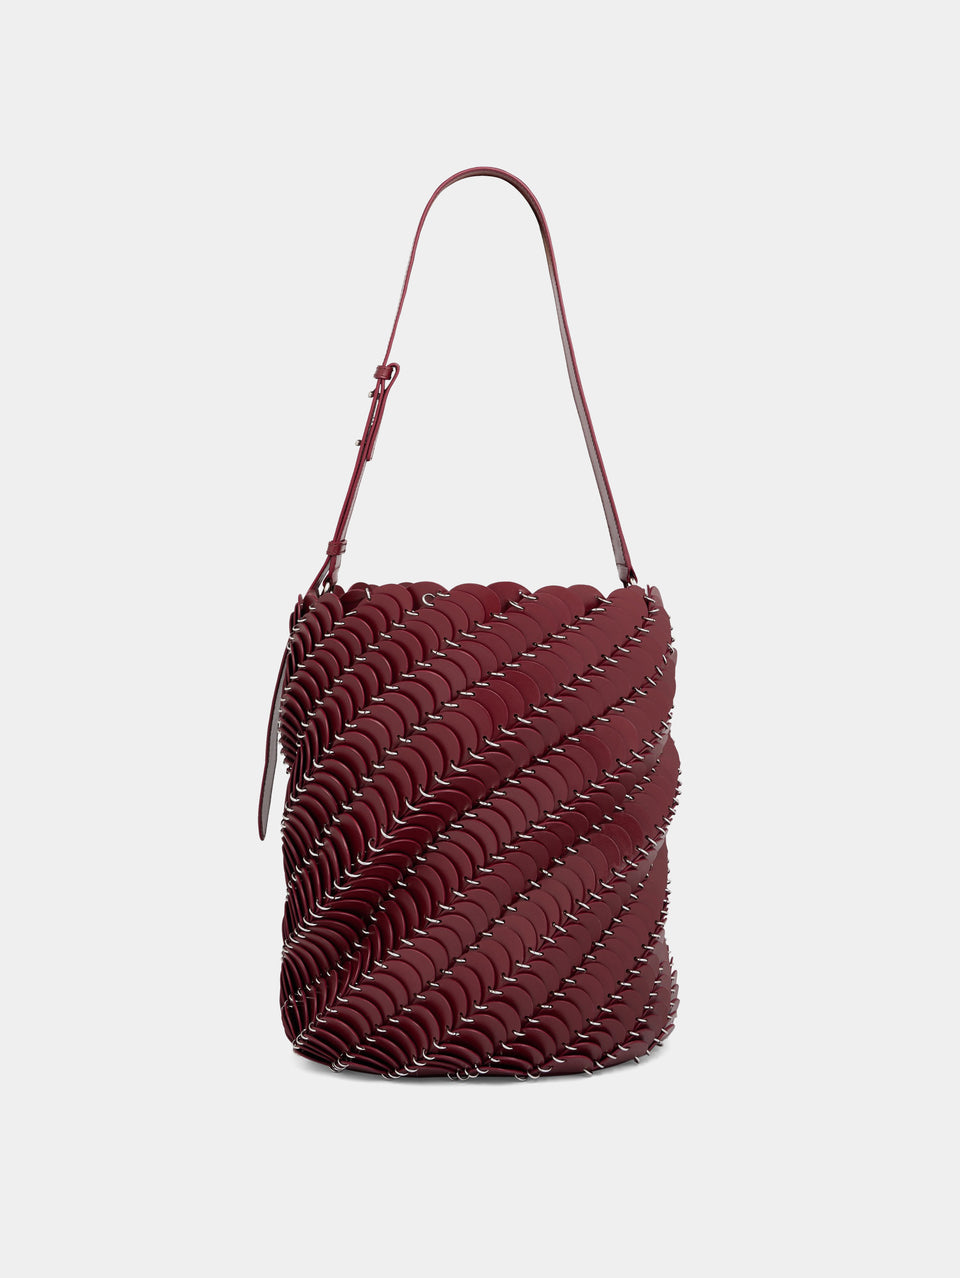 Large Merlot bucket Paco bag in leather